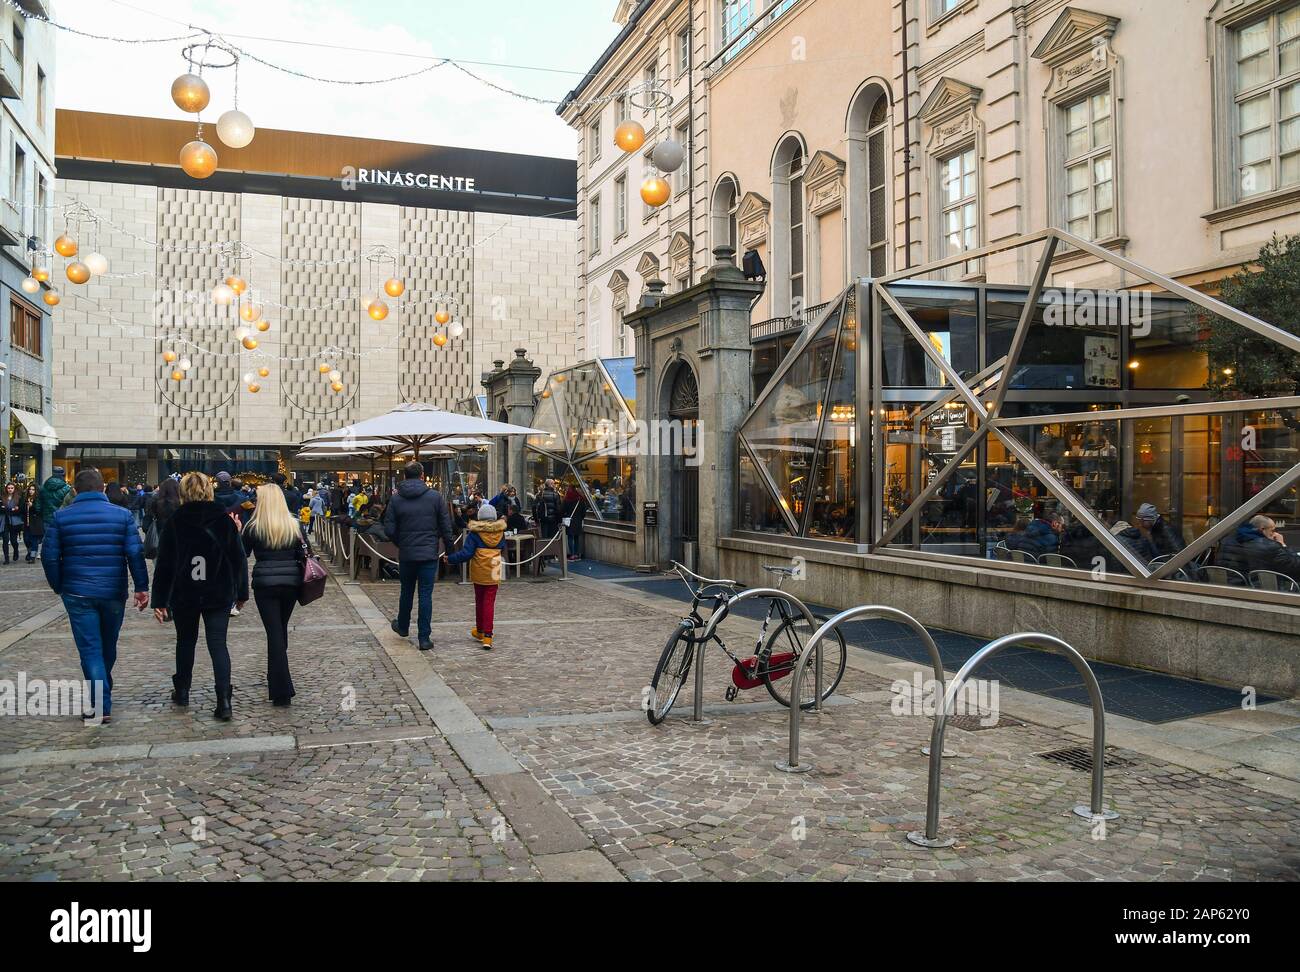 Glimpse of the historic centre of Turin with the façade of Rinascente department store and people walking during Christmas holidays, Piedmont, Italy Stock Photo